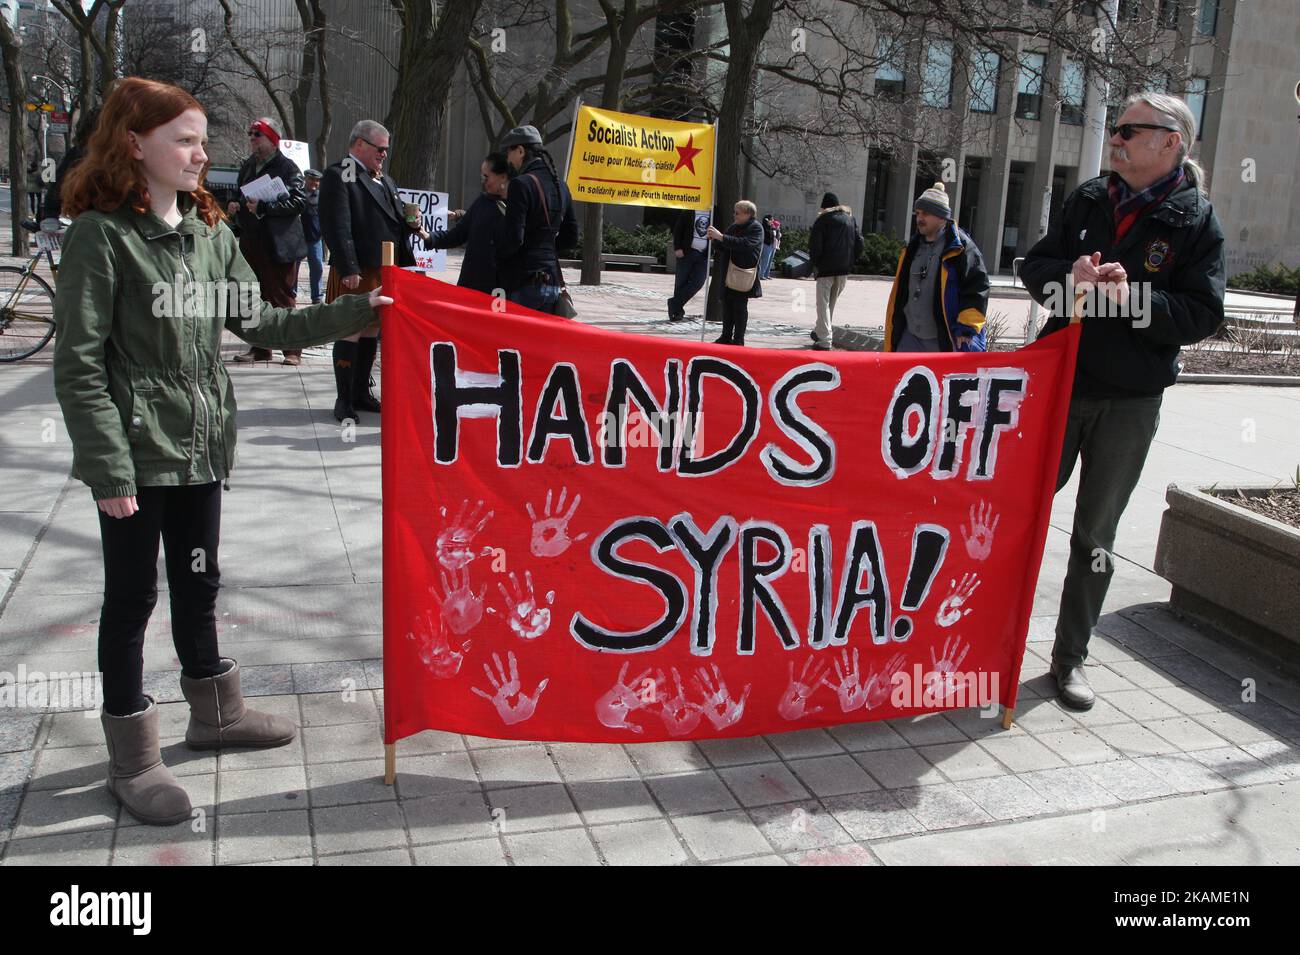 Demonstrators hold a banner saying 'Hands Off Syria' during a protest against US President Donald Trump's decision to launch airstrikes against Syria on April 8, 2017 in Toronto, Ontario Canada. Protestors gathered to outside the American Consulate in Toronto to denounce this week's airstrikes against the Syrian regime. America launched a missile strike against Syria for the first time since the civil war began, targeting an airbase in the small town of Idlib from which the United States claims this week’s chemical weapons attack on civilians was launched by Bashar al-Assad’s regime. (Photo by Stock Photo